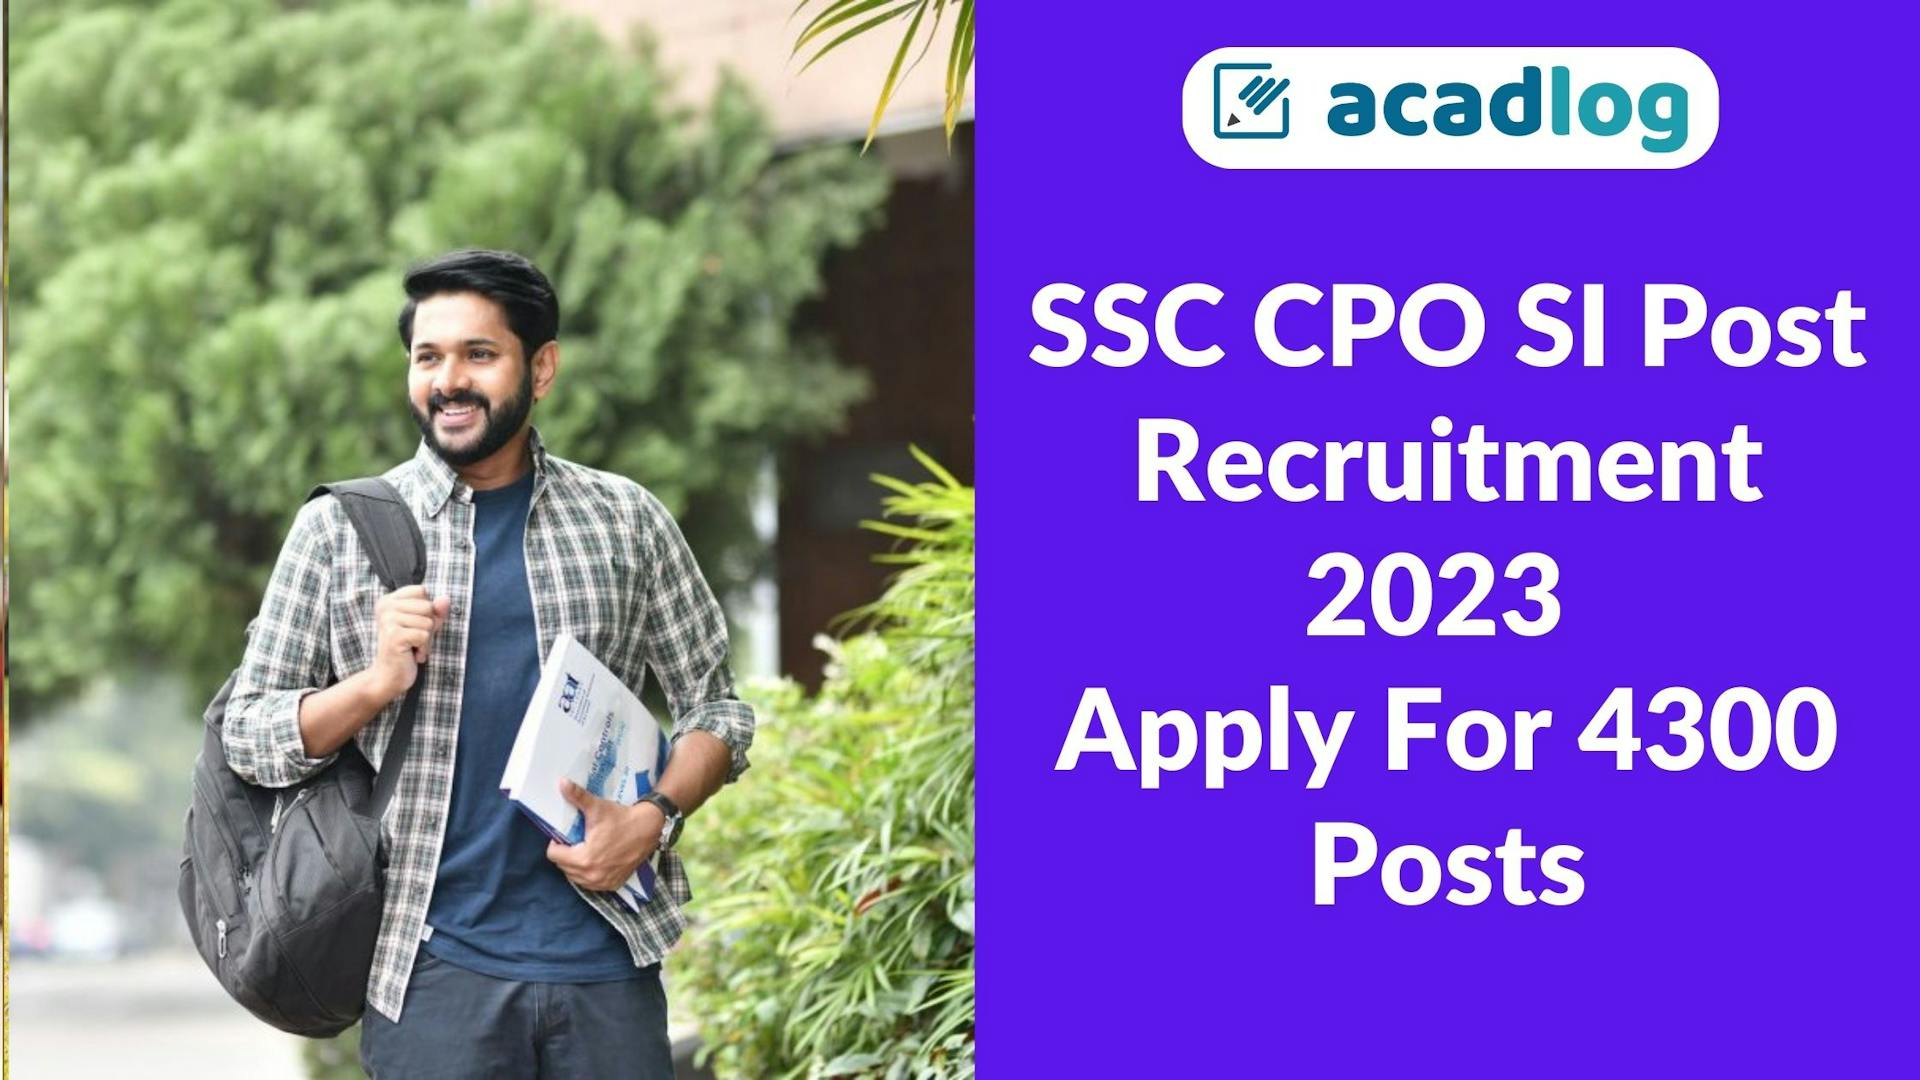 SSC Sub-Inspector SI in Delhi Police and Central Armed Police Forces Examination 2022 CPO SI PET PST Exam, Tier II Exam Date for 4300 Post